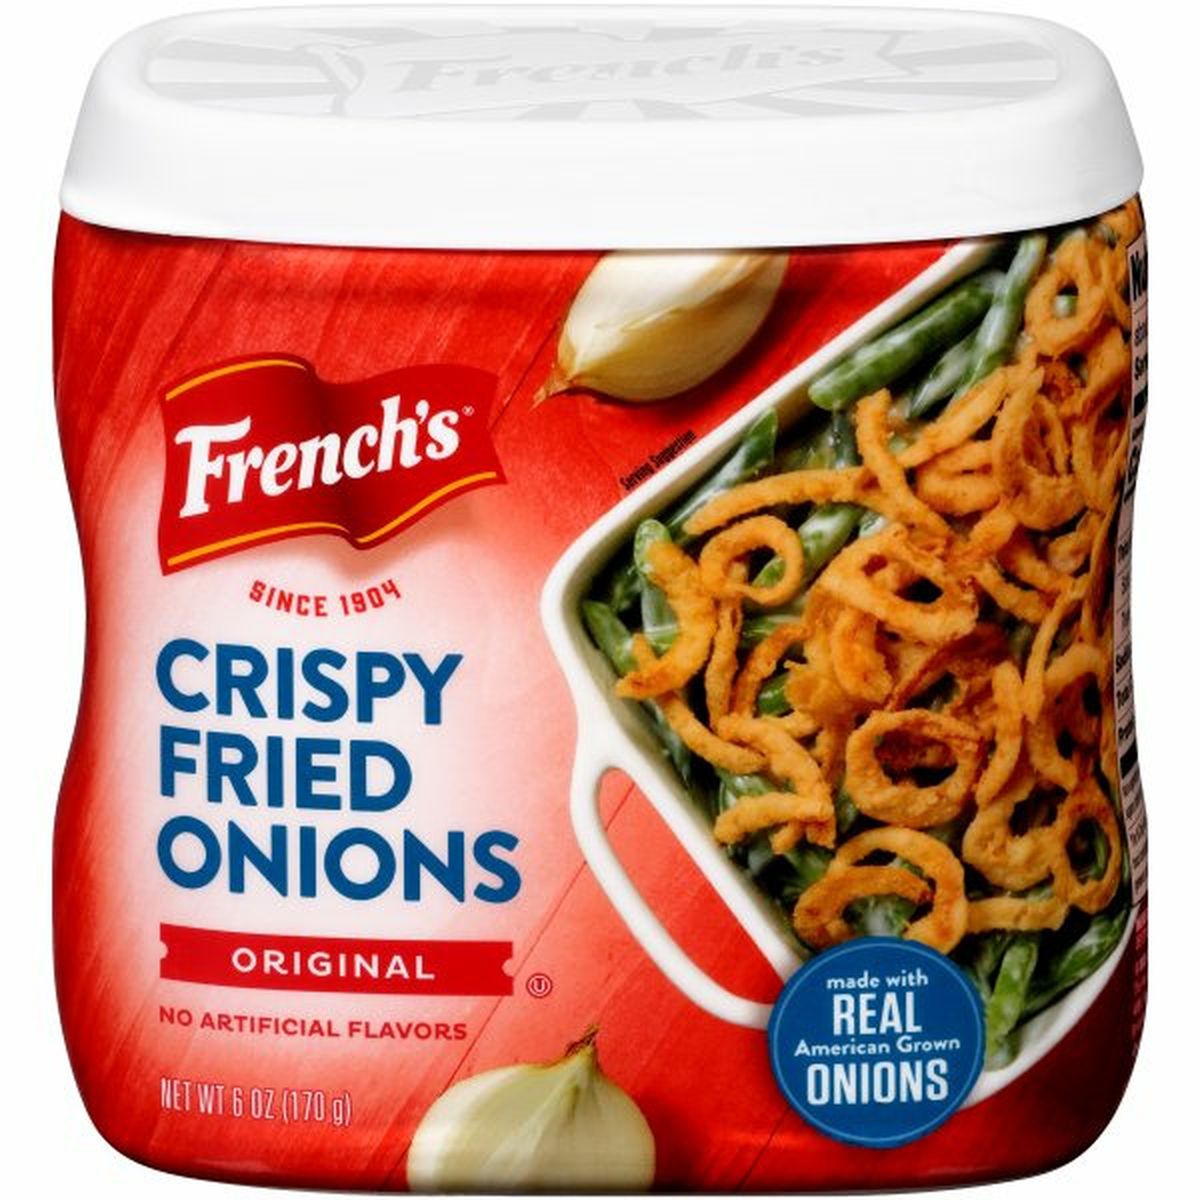 Calories in French'ss  Original Crispy Fried Onions